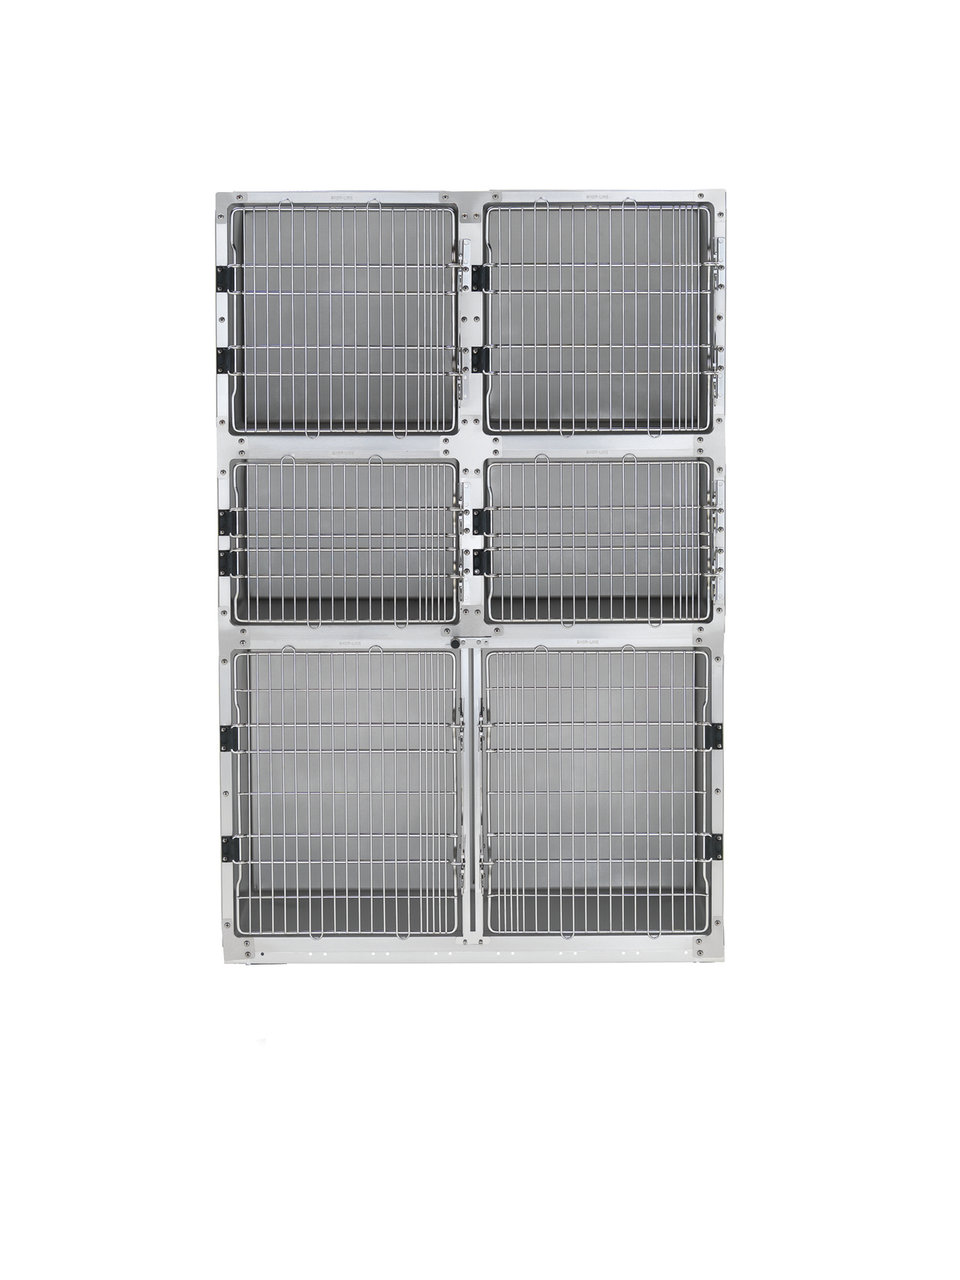 Shor-Line 4' Cage Assembly, Stainless Steel - Option C-Grooming Cage Bank-Pet's Choice Supply